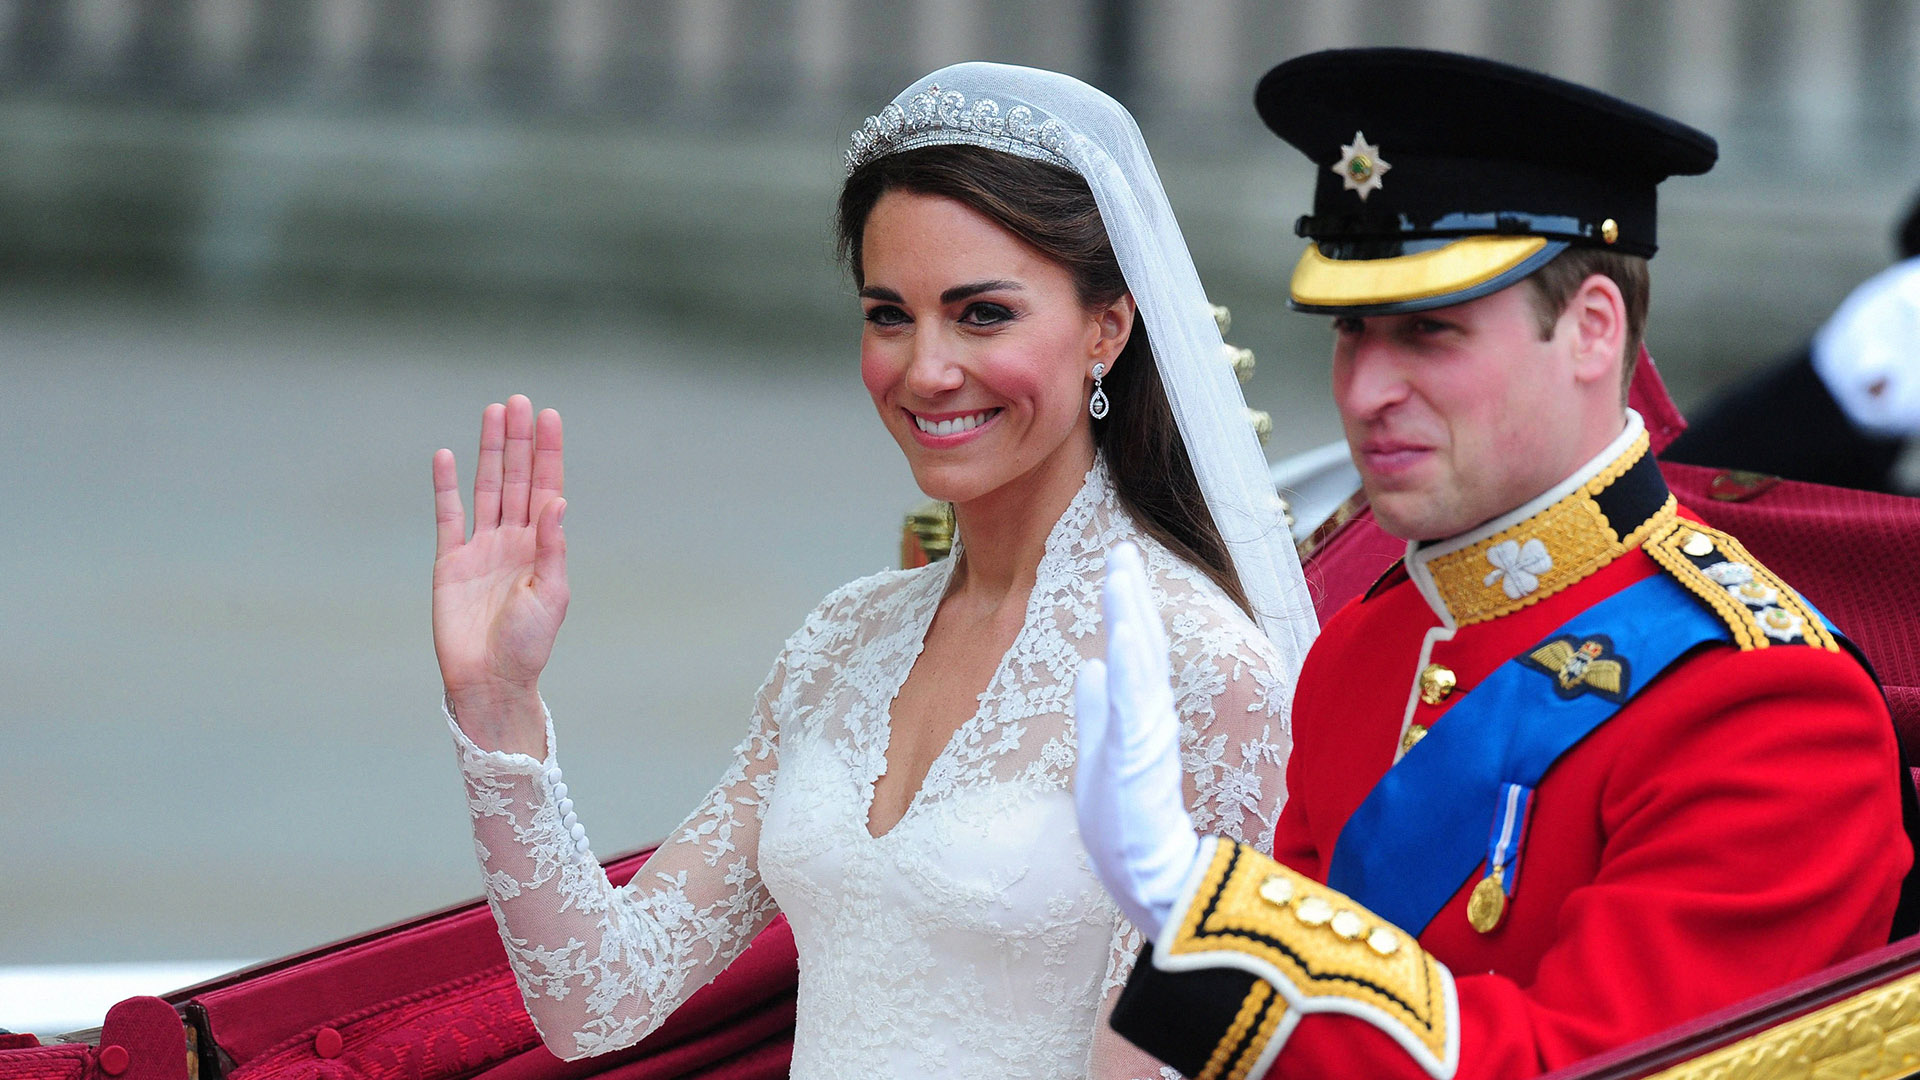 12 Years Later, Here's Where Kate Middleton's Wedding Dress Is Now